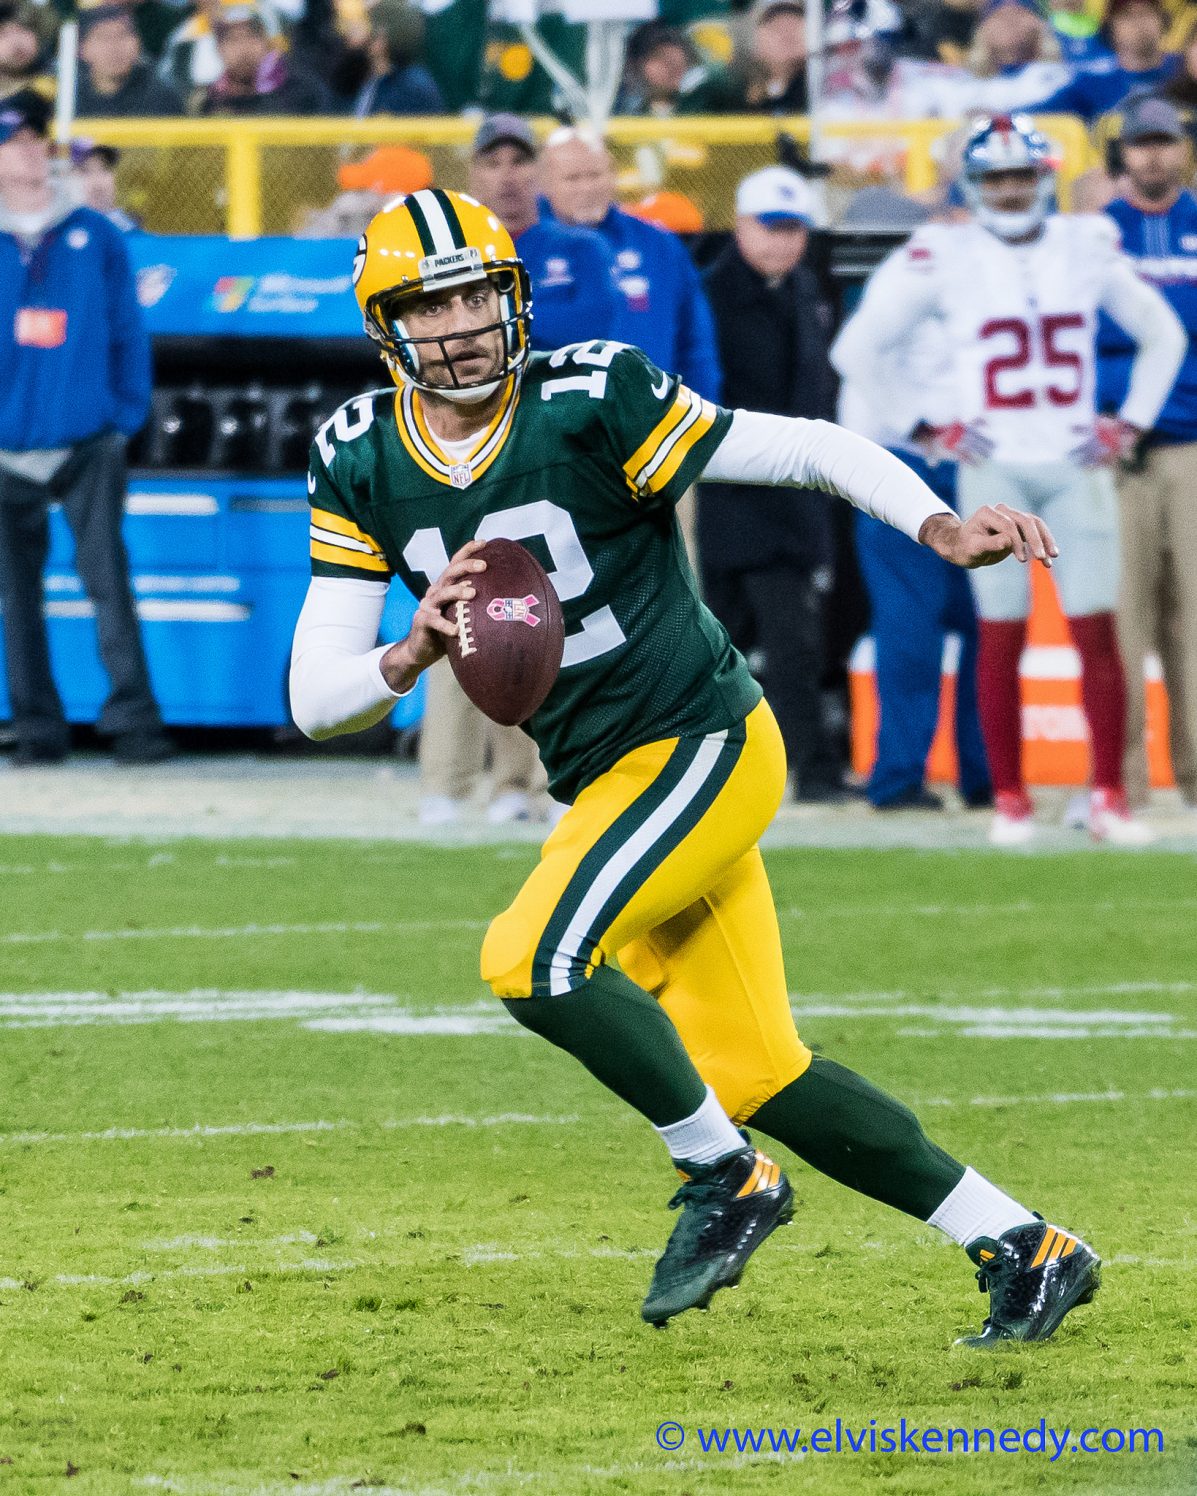 The Aaron Rodgers Return And Effect